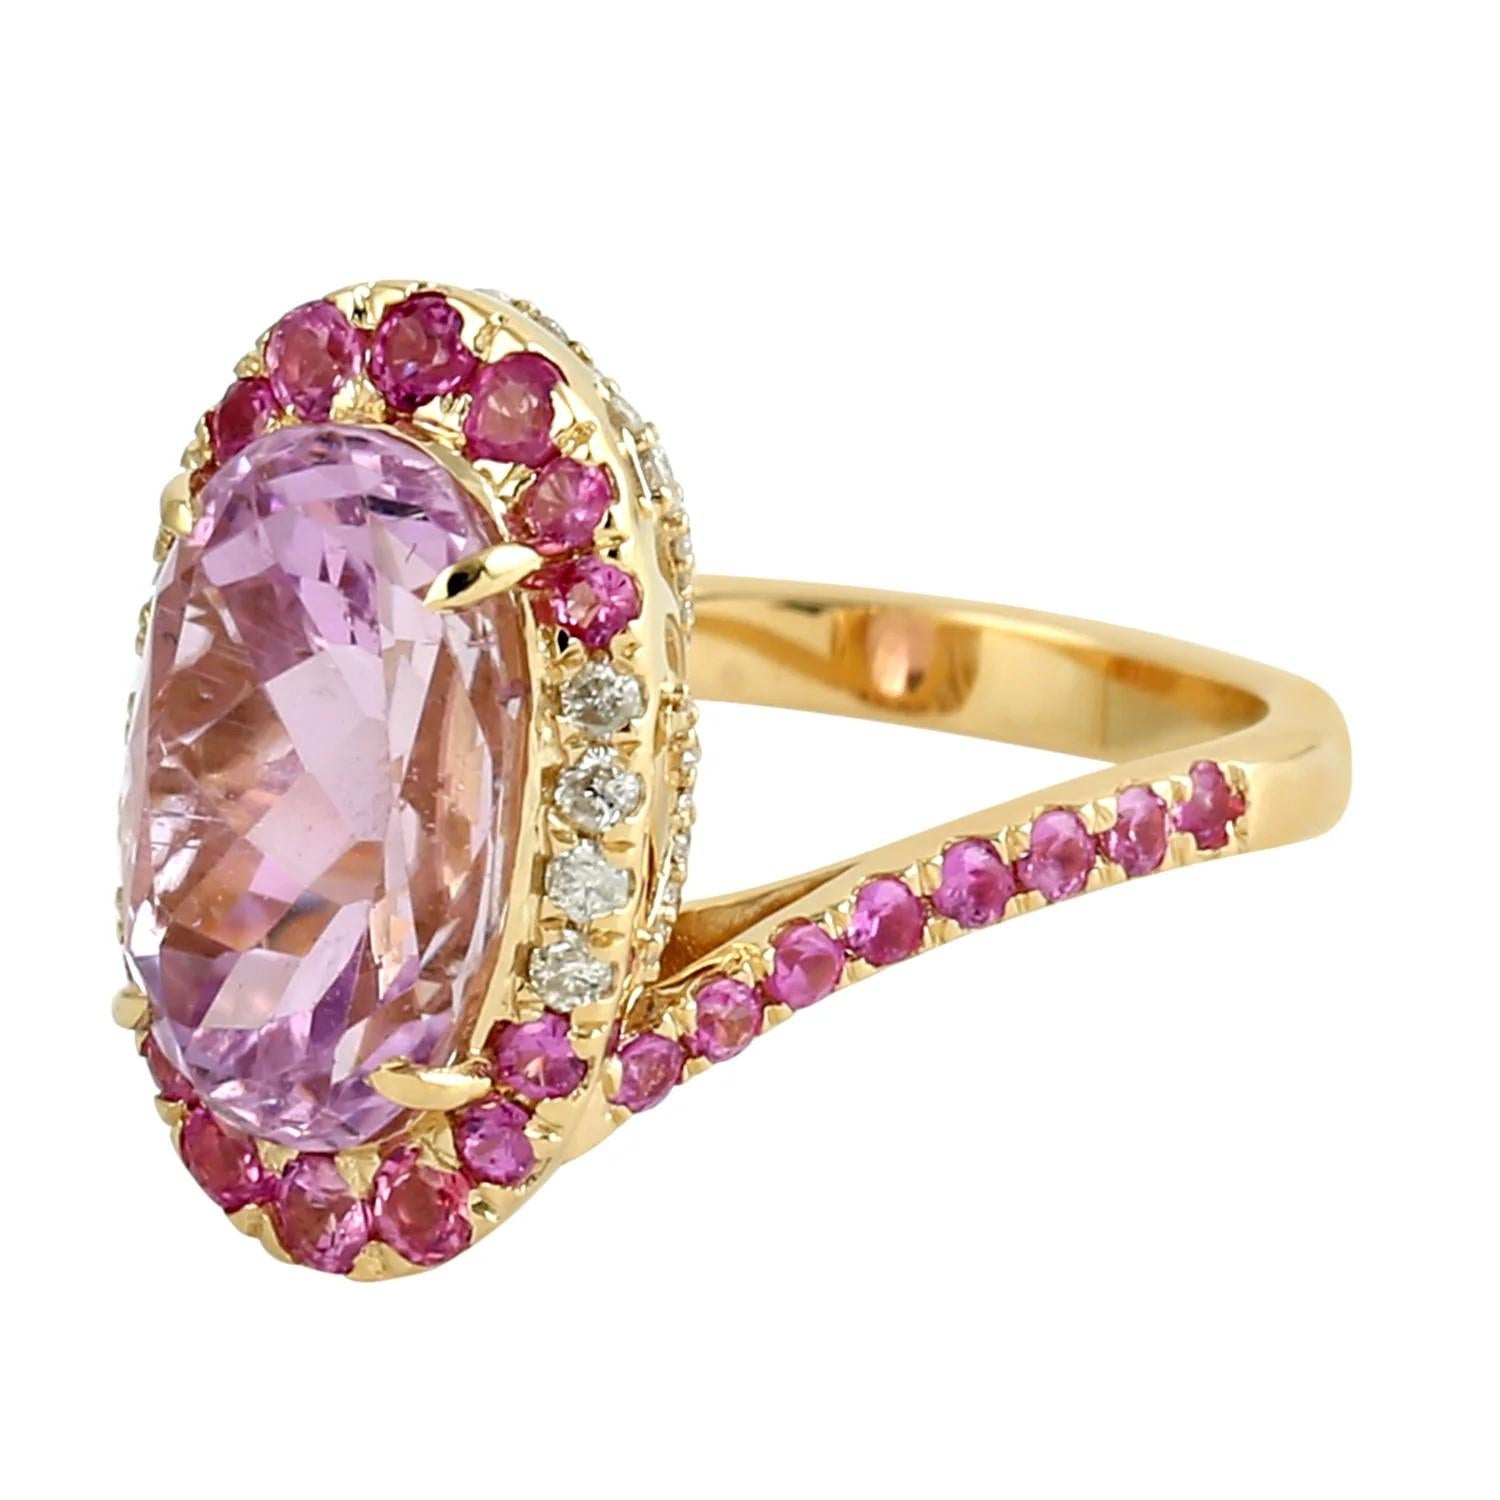 This ring has been meticulously crafted from 18-karat gold.  It is hand set with 6.39 carats kunzite, 1.02 carats sapphire & .35 carats of sparkling diamonds. 

FOLLOW  MEGHNA JEWELS storefront to view the latest collection & exclusive pieces. 